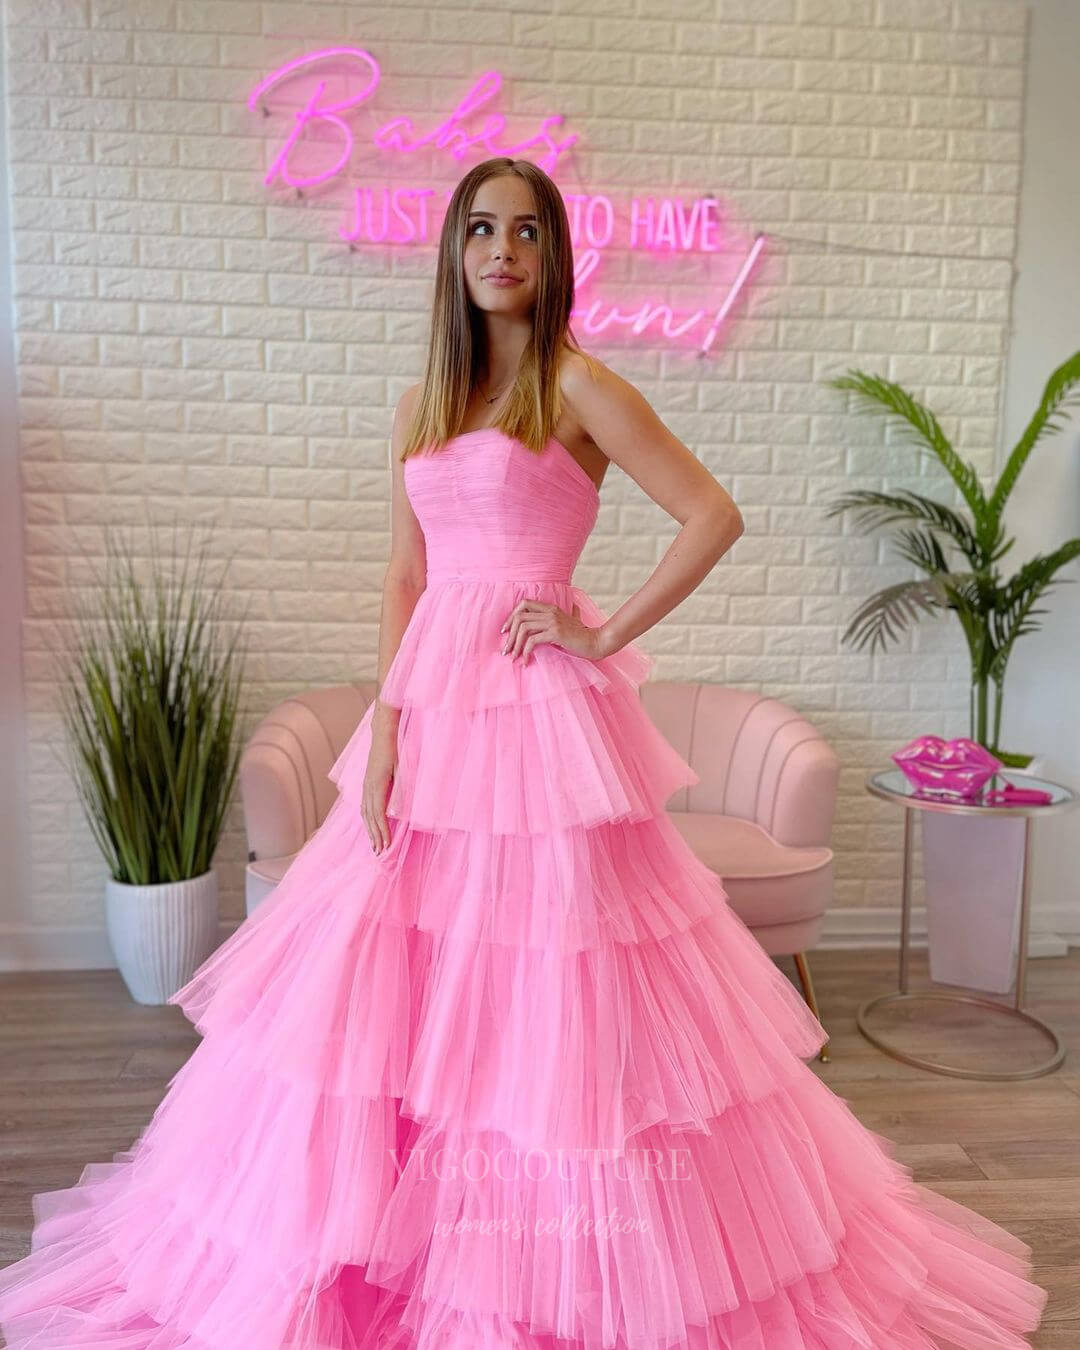 vigocouture-Strapless Pink Tiered Prom Dress 20845-Prom Dresses-vigocouture-Pink-US2-